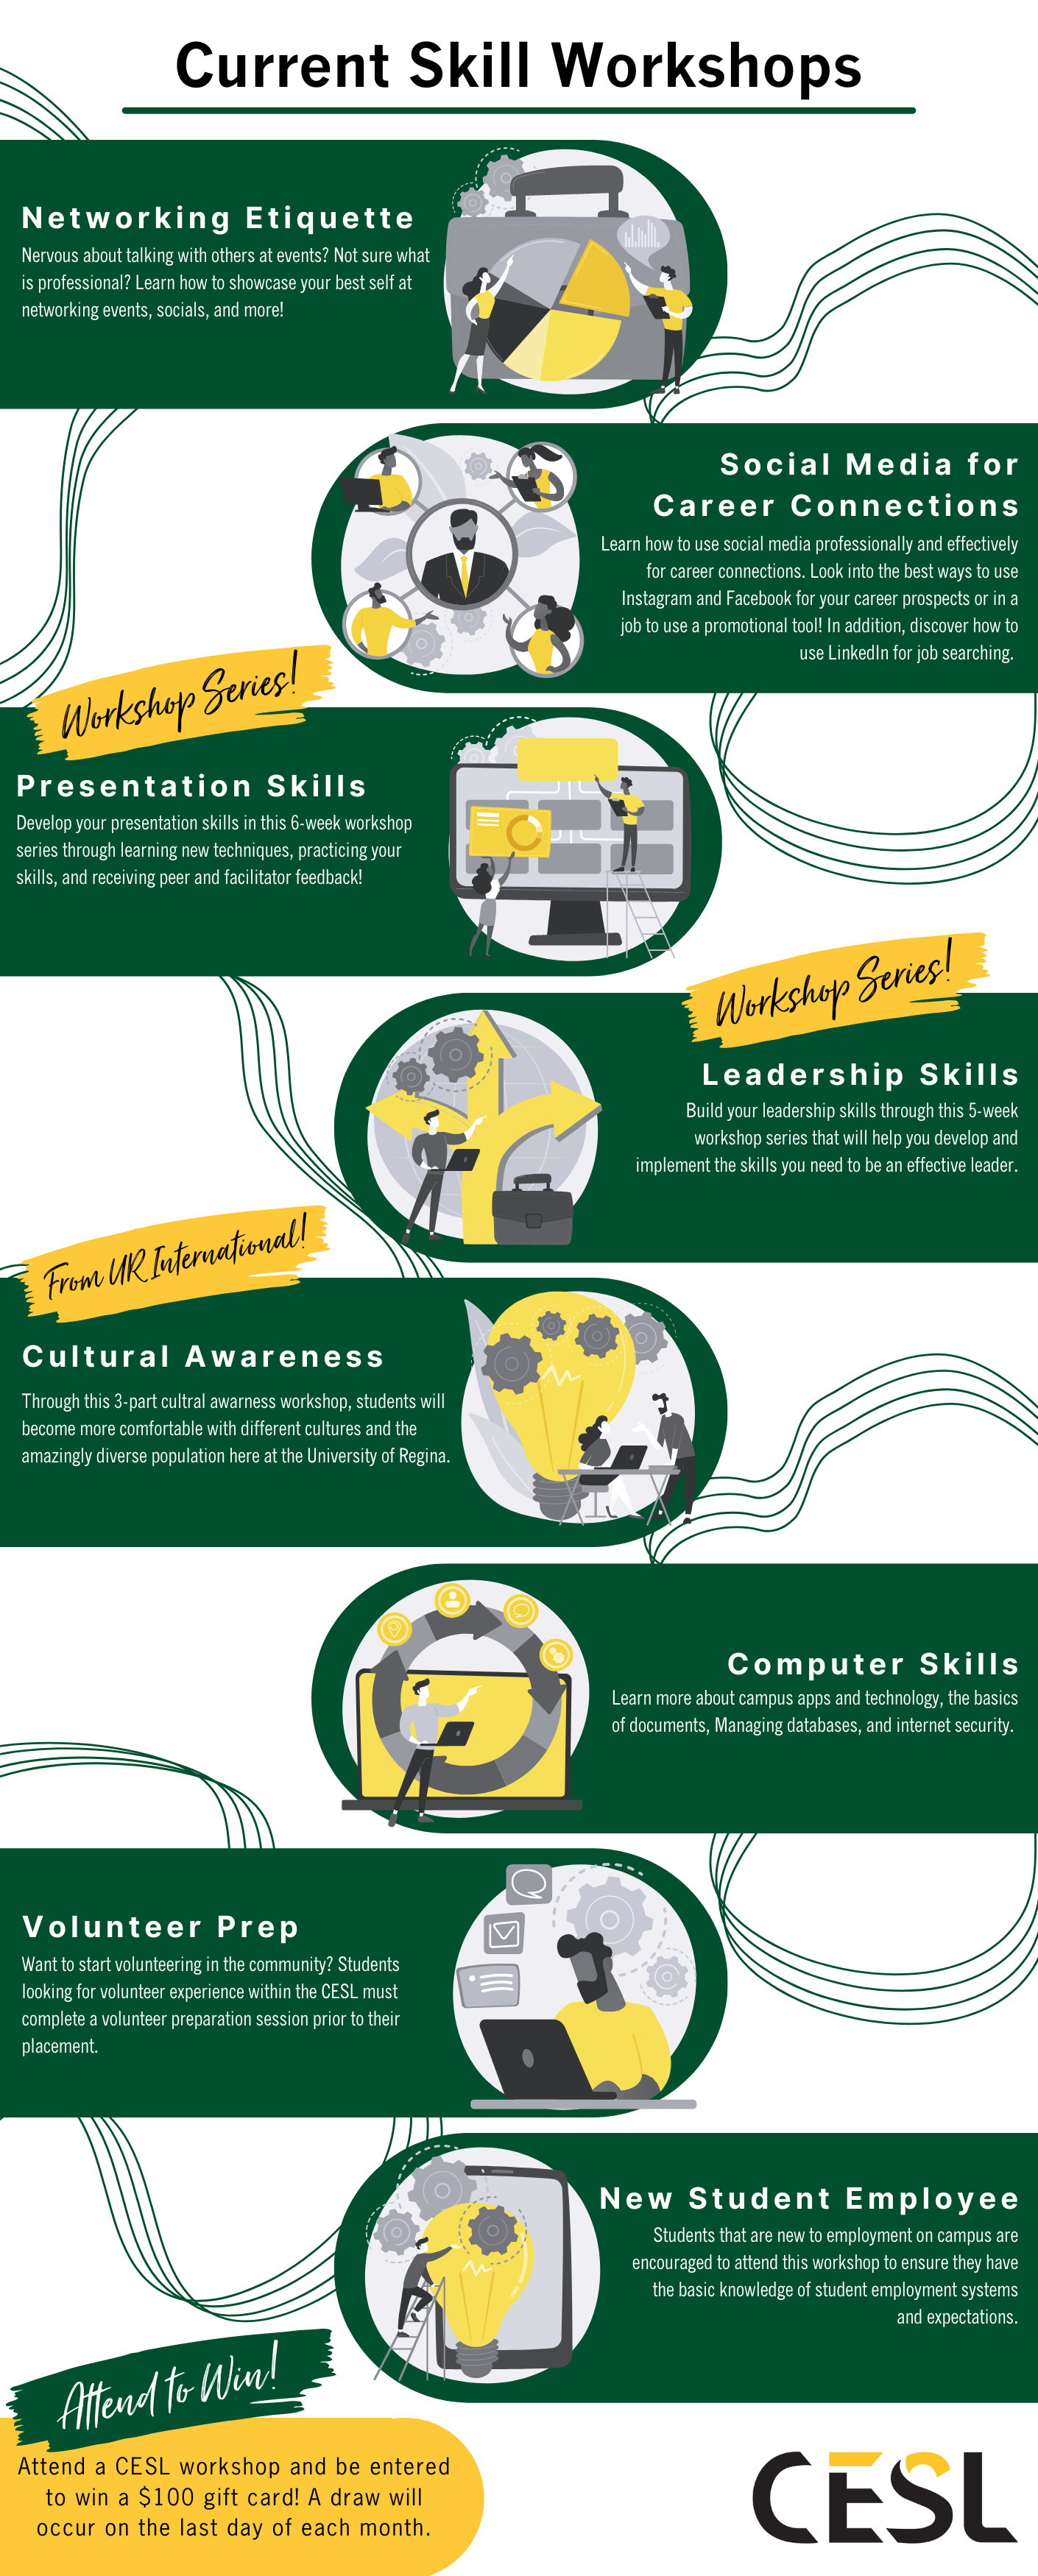 skill-workshops-infographic-final.png